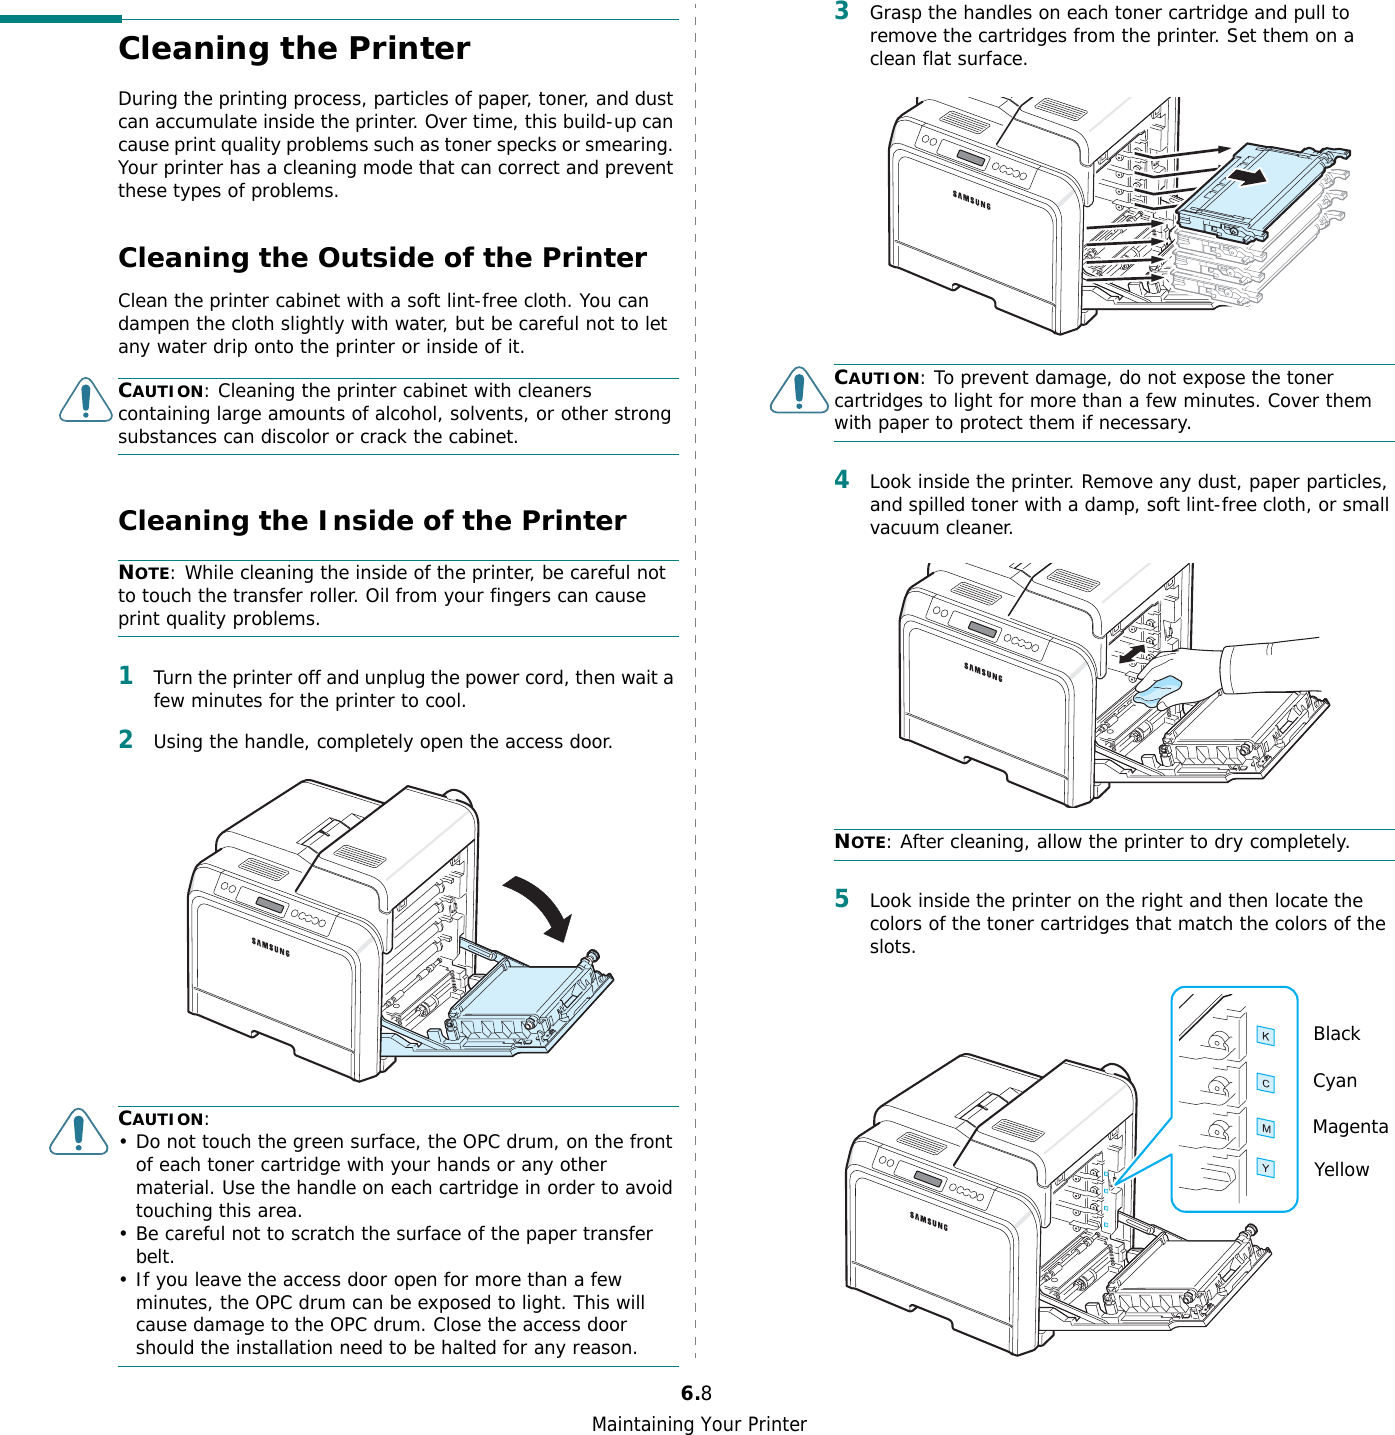 Maintaining Your Printer6.8Cleaning the PrinterDuring the printing process, particles of paper, toner, and dust can accumulate inside the printer. Over time, this build-up can cause print quality problems such as toner specks or smearing. Your printer has a cleaning mode that can correct and prevent these types of problems.Cleaning the Outside of the PrinterClean the printer cabinet with a soft lint-free cloth. You can dampen the cloth slightly with water, but be careful not to let any water drip onto the printer or inside of it.CAUTION: Cleaning the printer cabinet with cleaners containing large amounts of alcohol, solvents, or other strong substances can discolor or crack the cabinet.Cleaning the Inside of the PrinterNOTE: While cleaning the inside of the printer, be careful not to touch the transfer roller. Oil from your fingers can cause print quality problems.1Turn the printer off and unplug the power cord, then wait a few minutes for the printer to cool.2Using the handle, completely open the access door.CAUTION:• Do not touch the green surface, the OPC drum, on the front of each toner cartridge with your hands or any other material. Use the handle on each cartridge in order to avoid touching this area.• Be careful not to scratch the surface of the paper transfer belt.• If you leave the access door open for more than a few minutes, the OPC drum can be exposed to light. This will cause damage to the OPC drum. Close the access door should the installation need to be halted for any reason.3Grasp the handles on each toner cartridge and pull to remove the cartridges from the printer. Set them on a clean flat surface. CAUTION: To prevent damage, do not expose the toner cartridges to light for more than a few minutes. Cover them with paper to protect them if necessary.4Look inside the printer. Remove any dust, paper particles, and spilled toner with a damp, soft lint-free cloth, or small vacuum cleaner.NOTE: After cleaning, allow the printer to dry completely.5Look inside the printer on the right and then locate the colors of the toner cartridges that match the colors of the slots.BlackCyanMagentaYellow